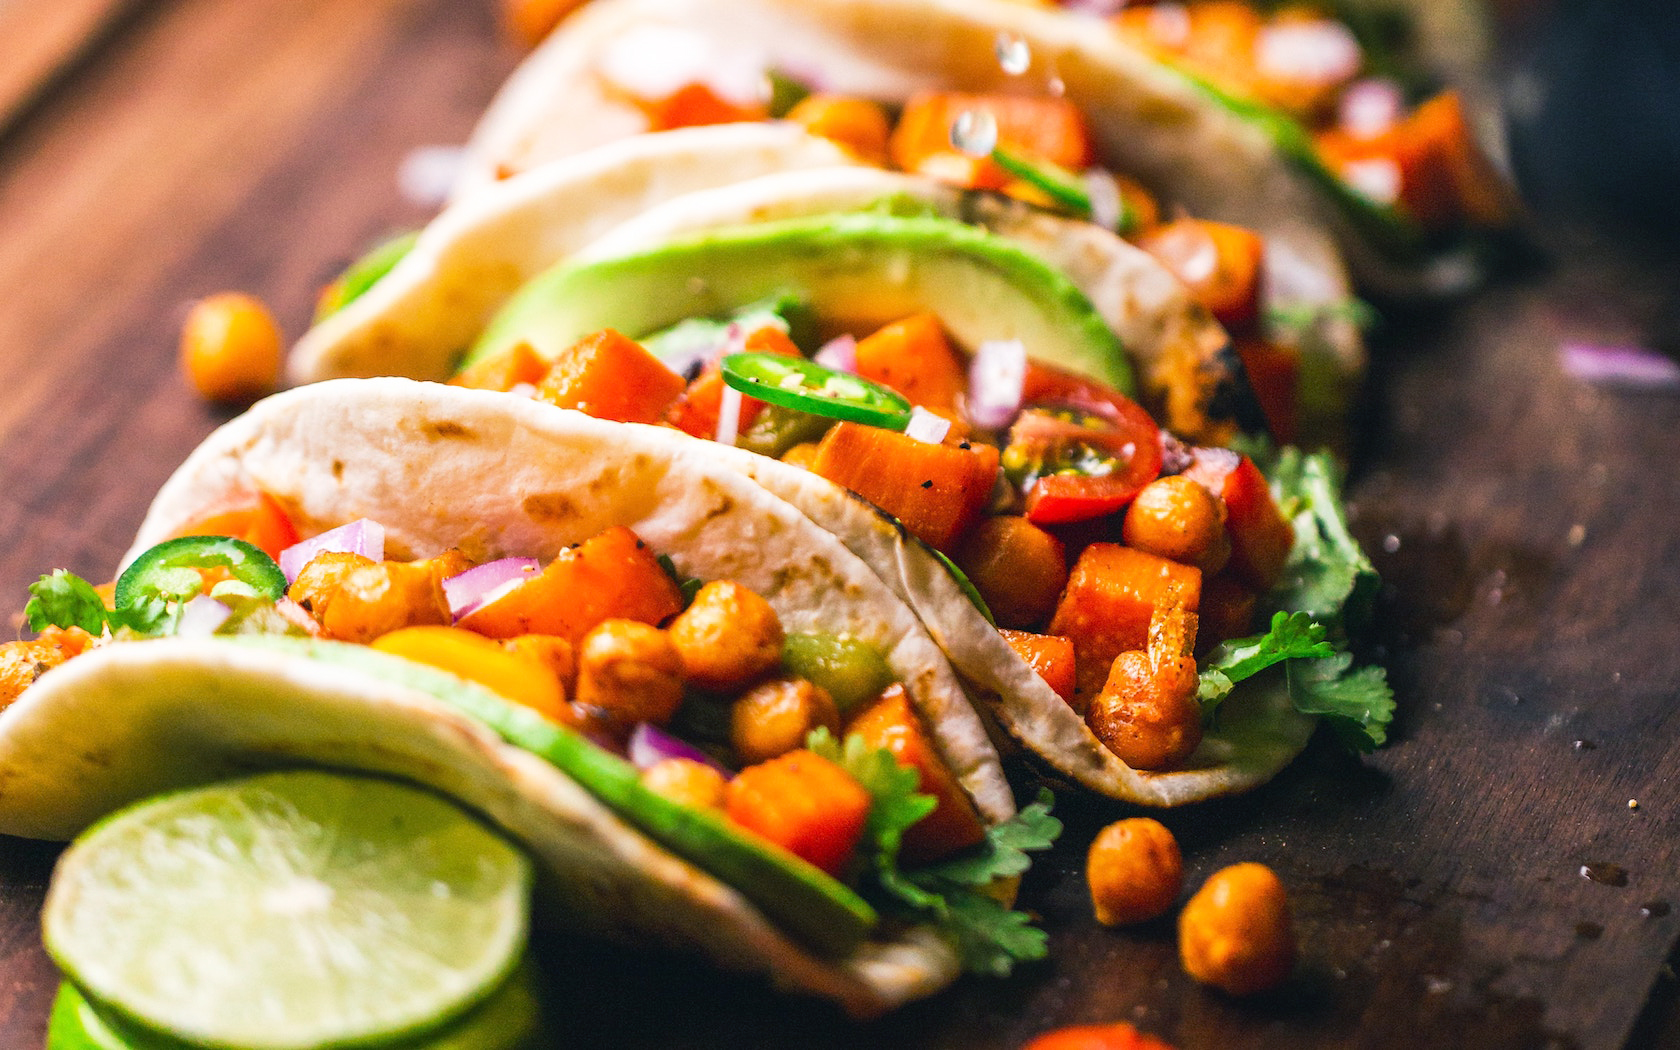 All-You-Can-Eat Tacos Are Just $19 At El Camino Cantina Manly